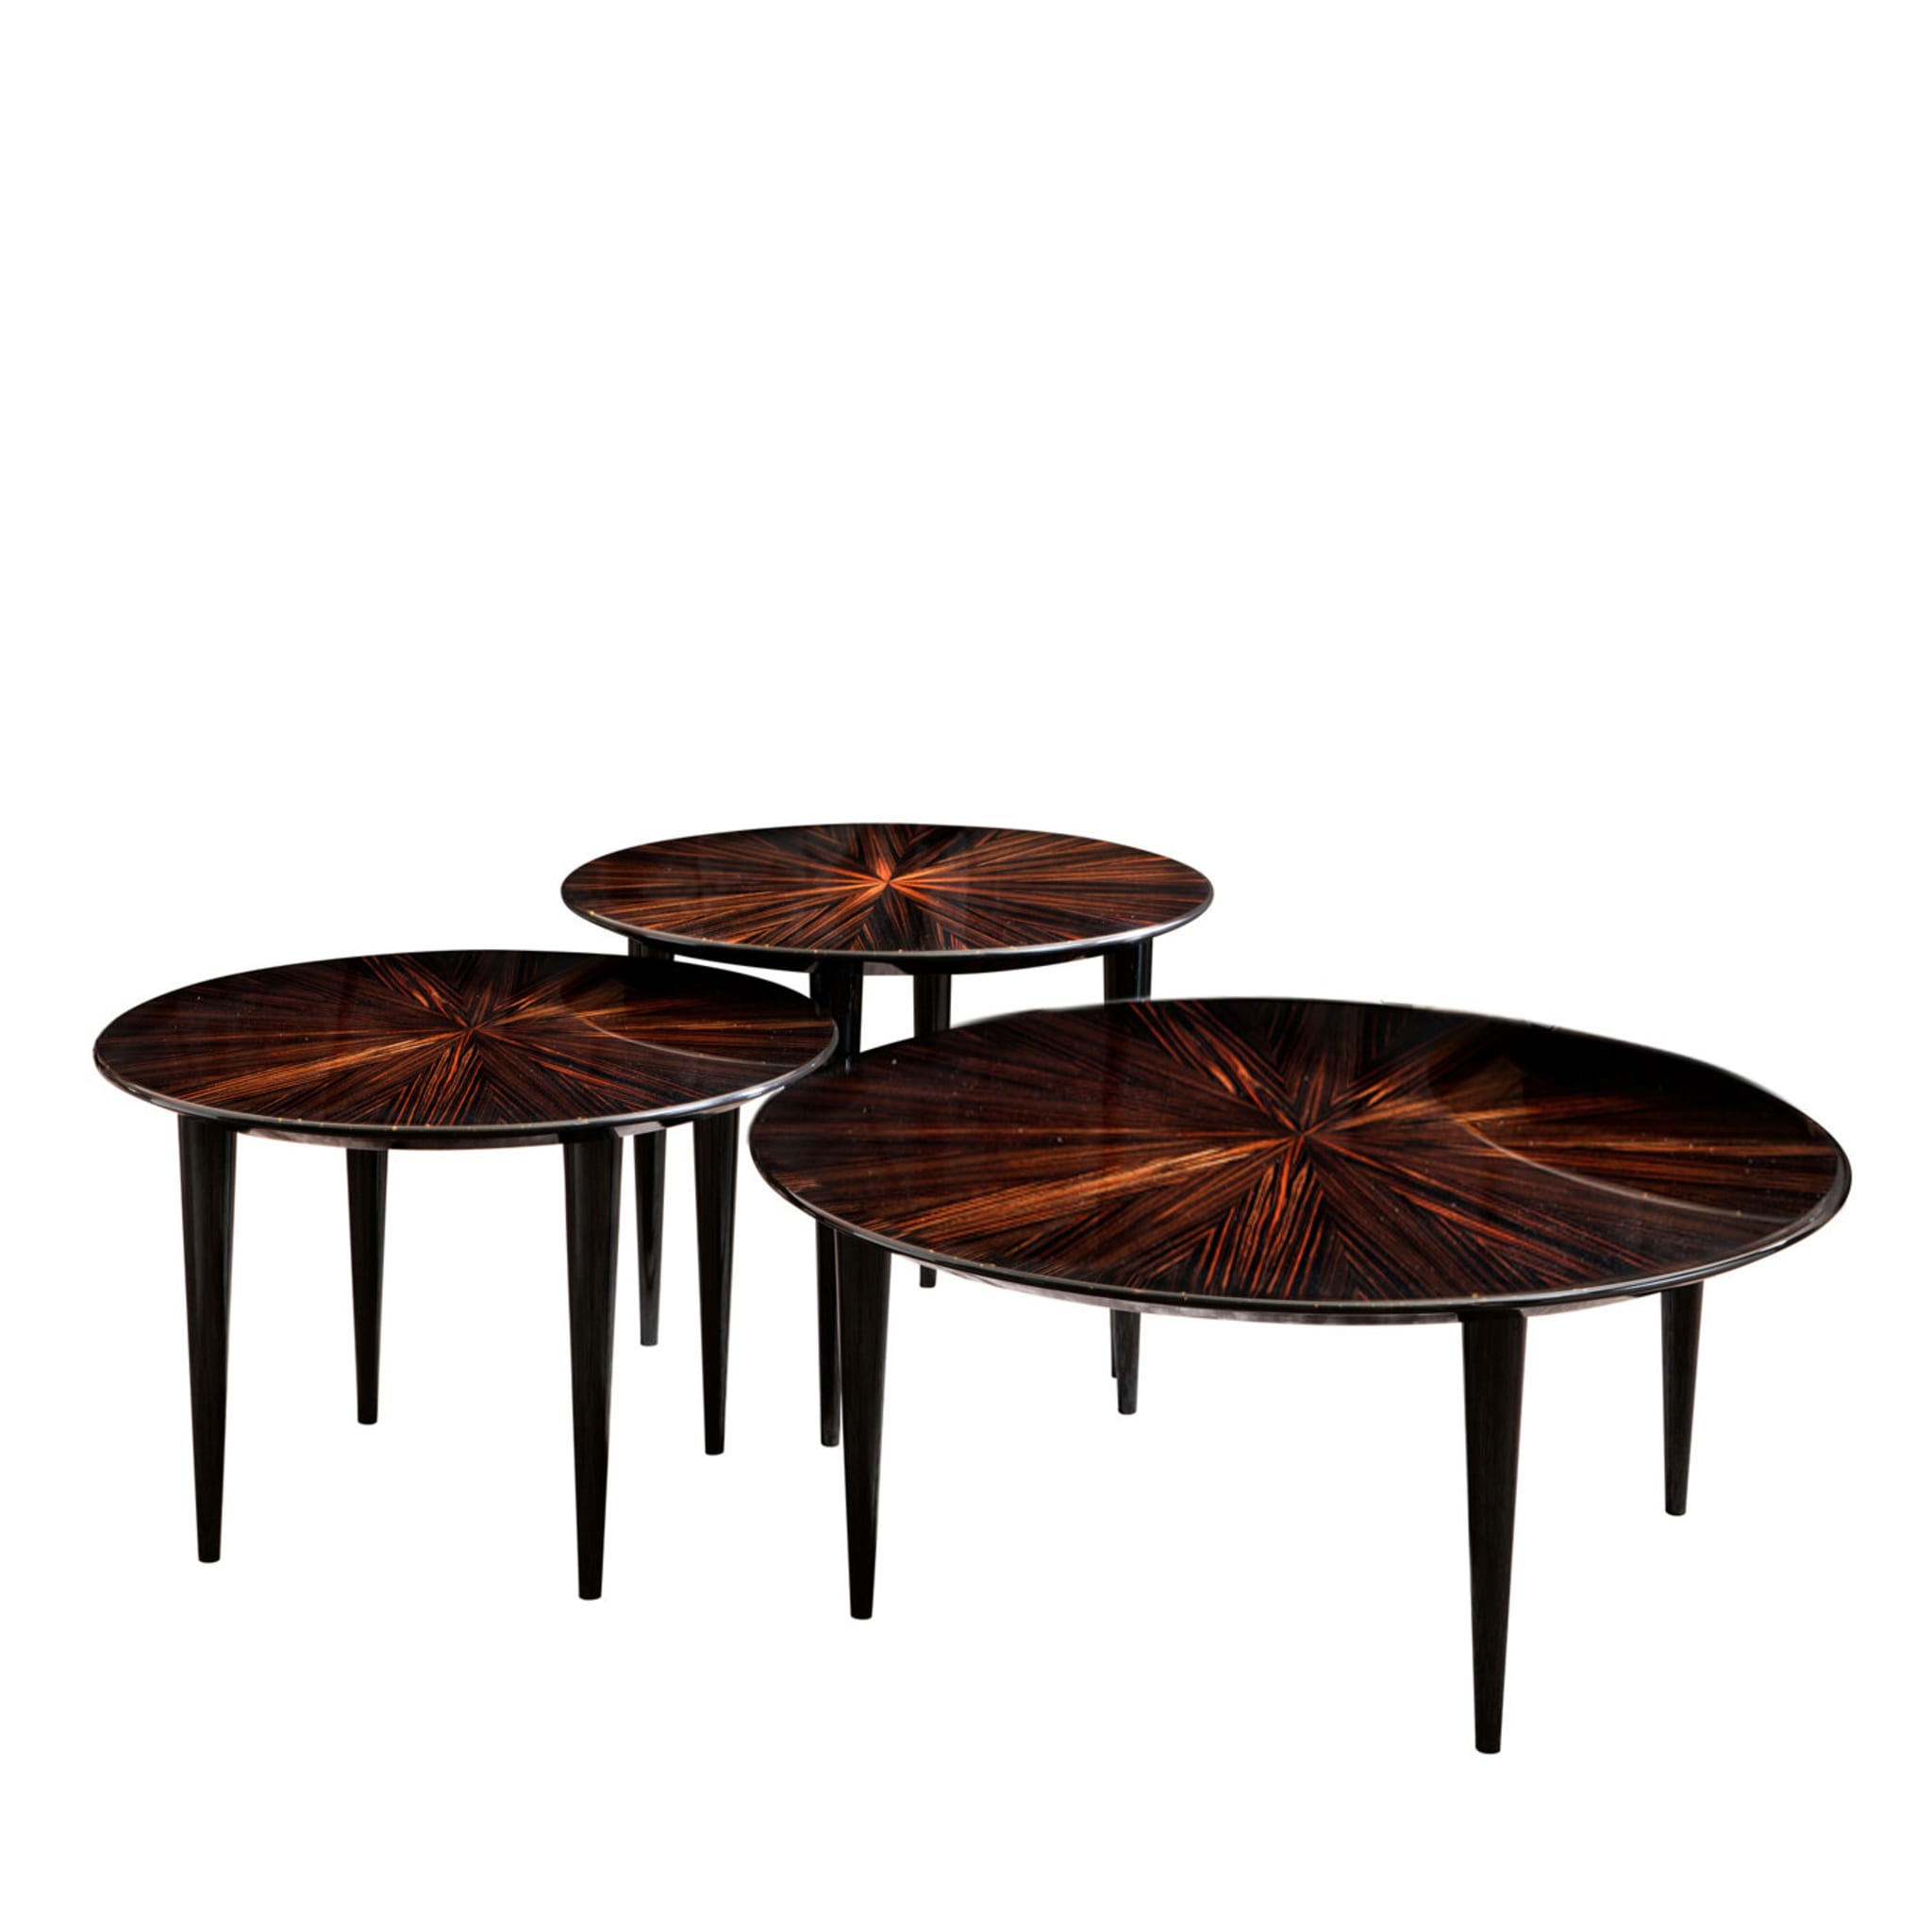 Pierrot Set of 3 Nesting Tables - Main view